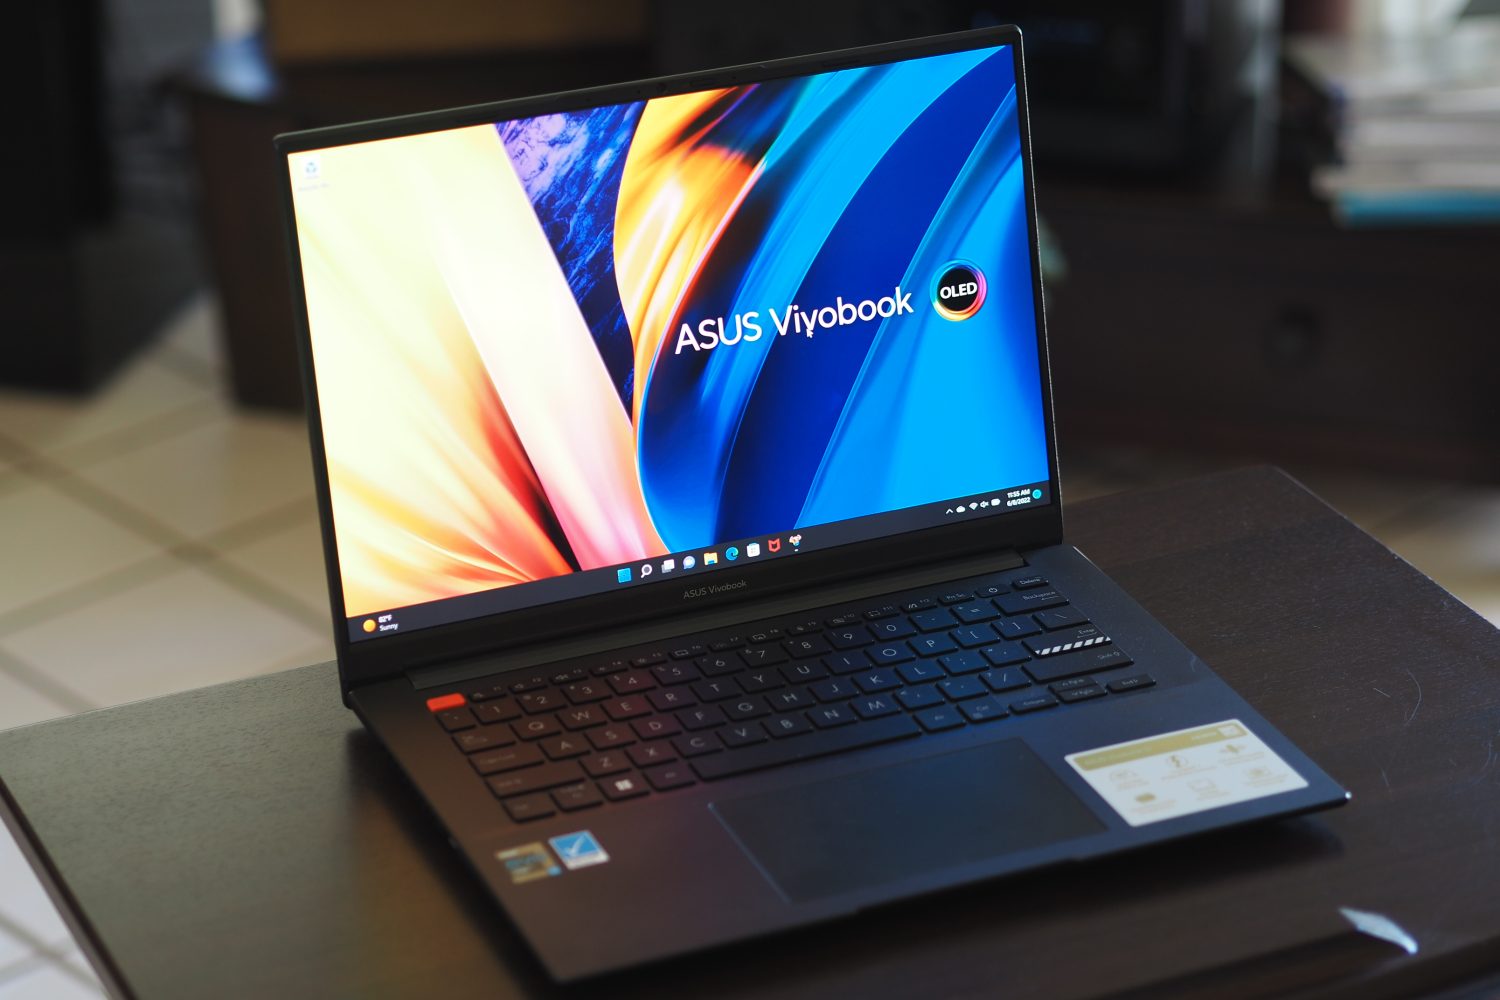 Asus Vivobook S15 OLED unboxed: A laptop for creativity - The